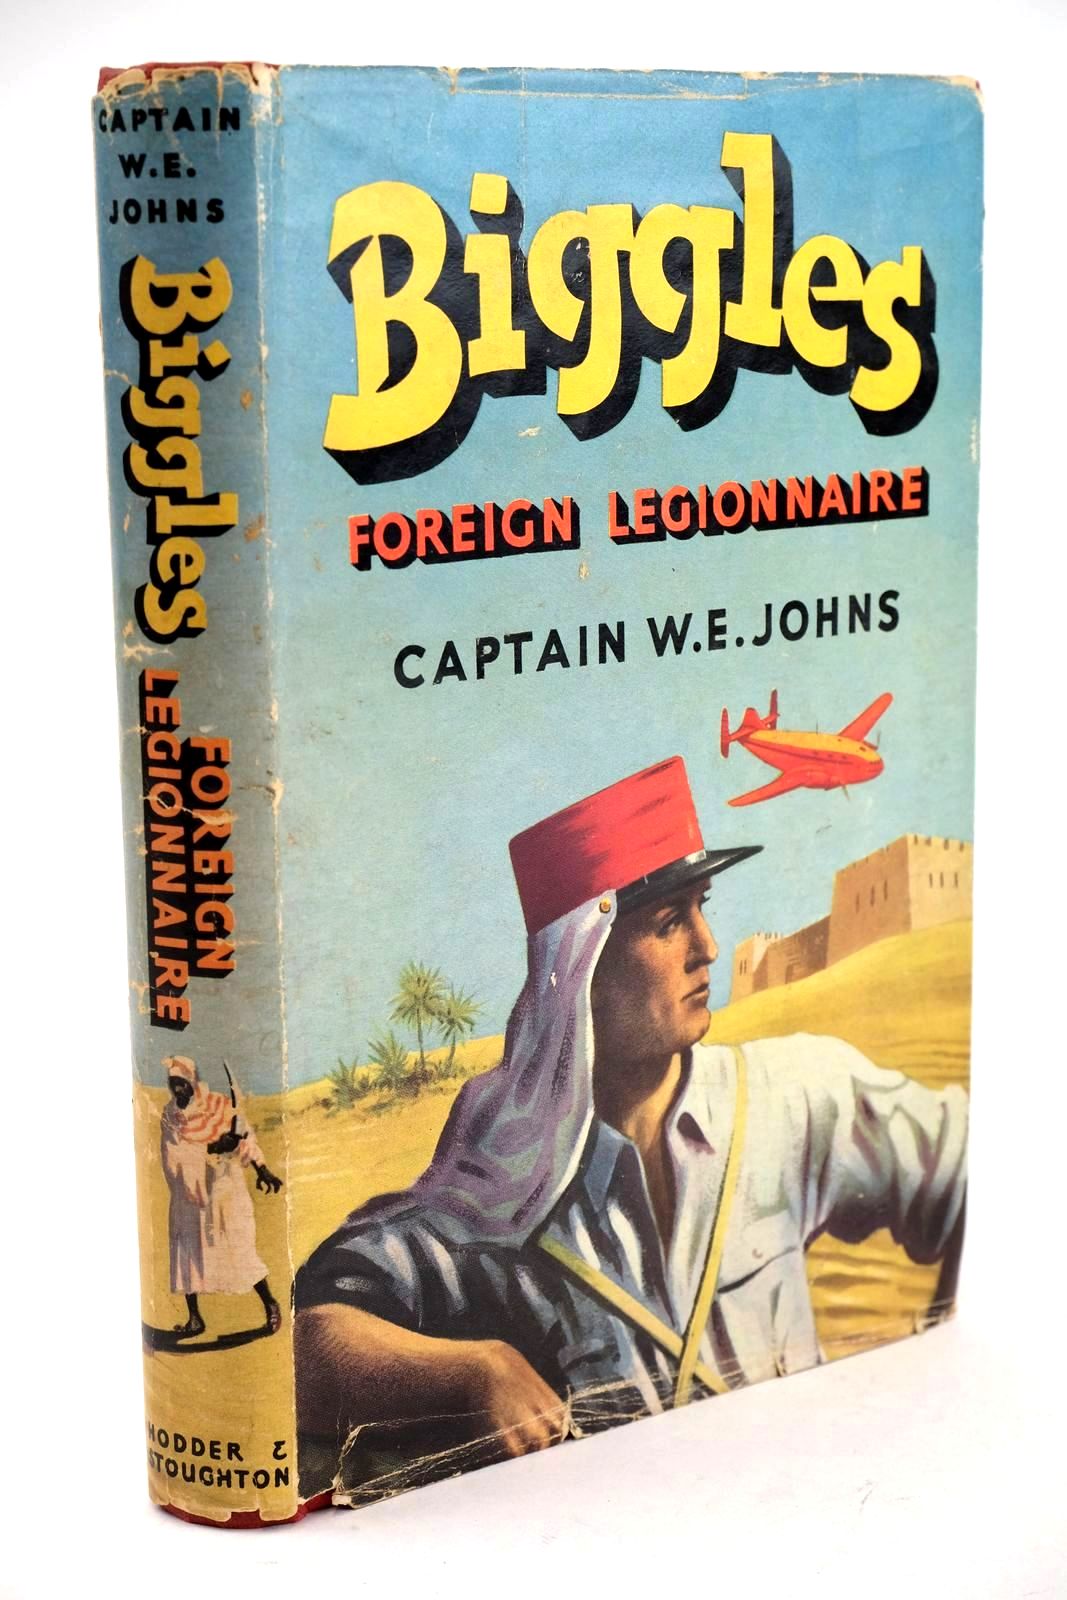 Photo of BIGGLES FOREIGN LEGIONNAIRE written by Johns, W.E. illustrated by Stead,  published by Hodder &amp; Stoughton (STOCK CODE: 1324164)  for sale by Stella & Rose's Books